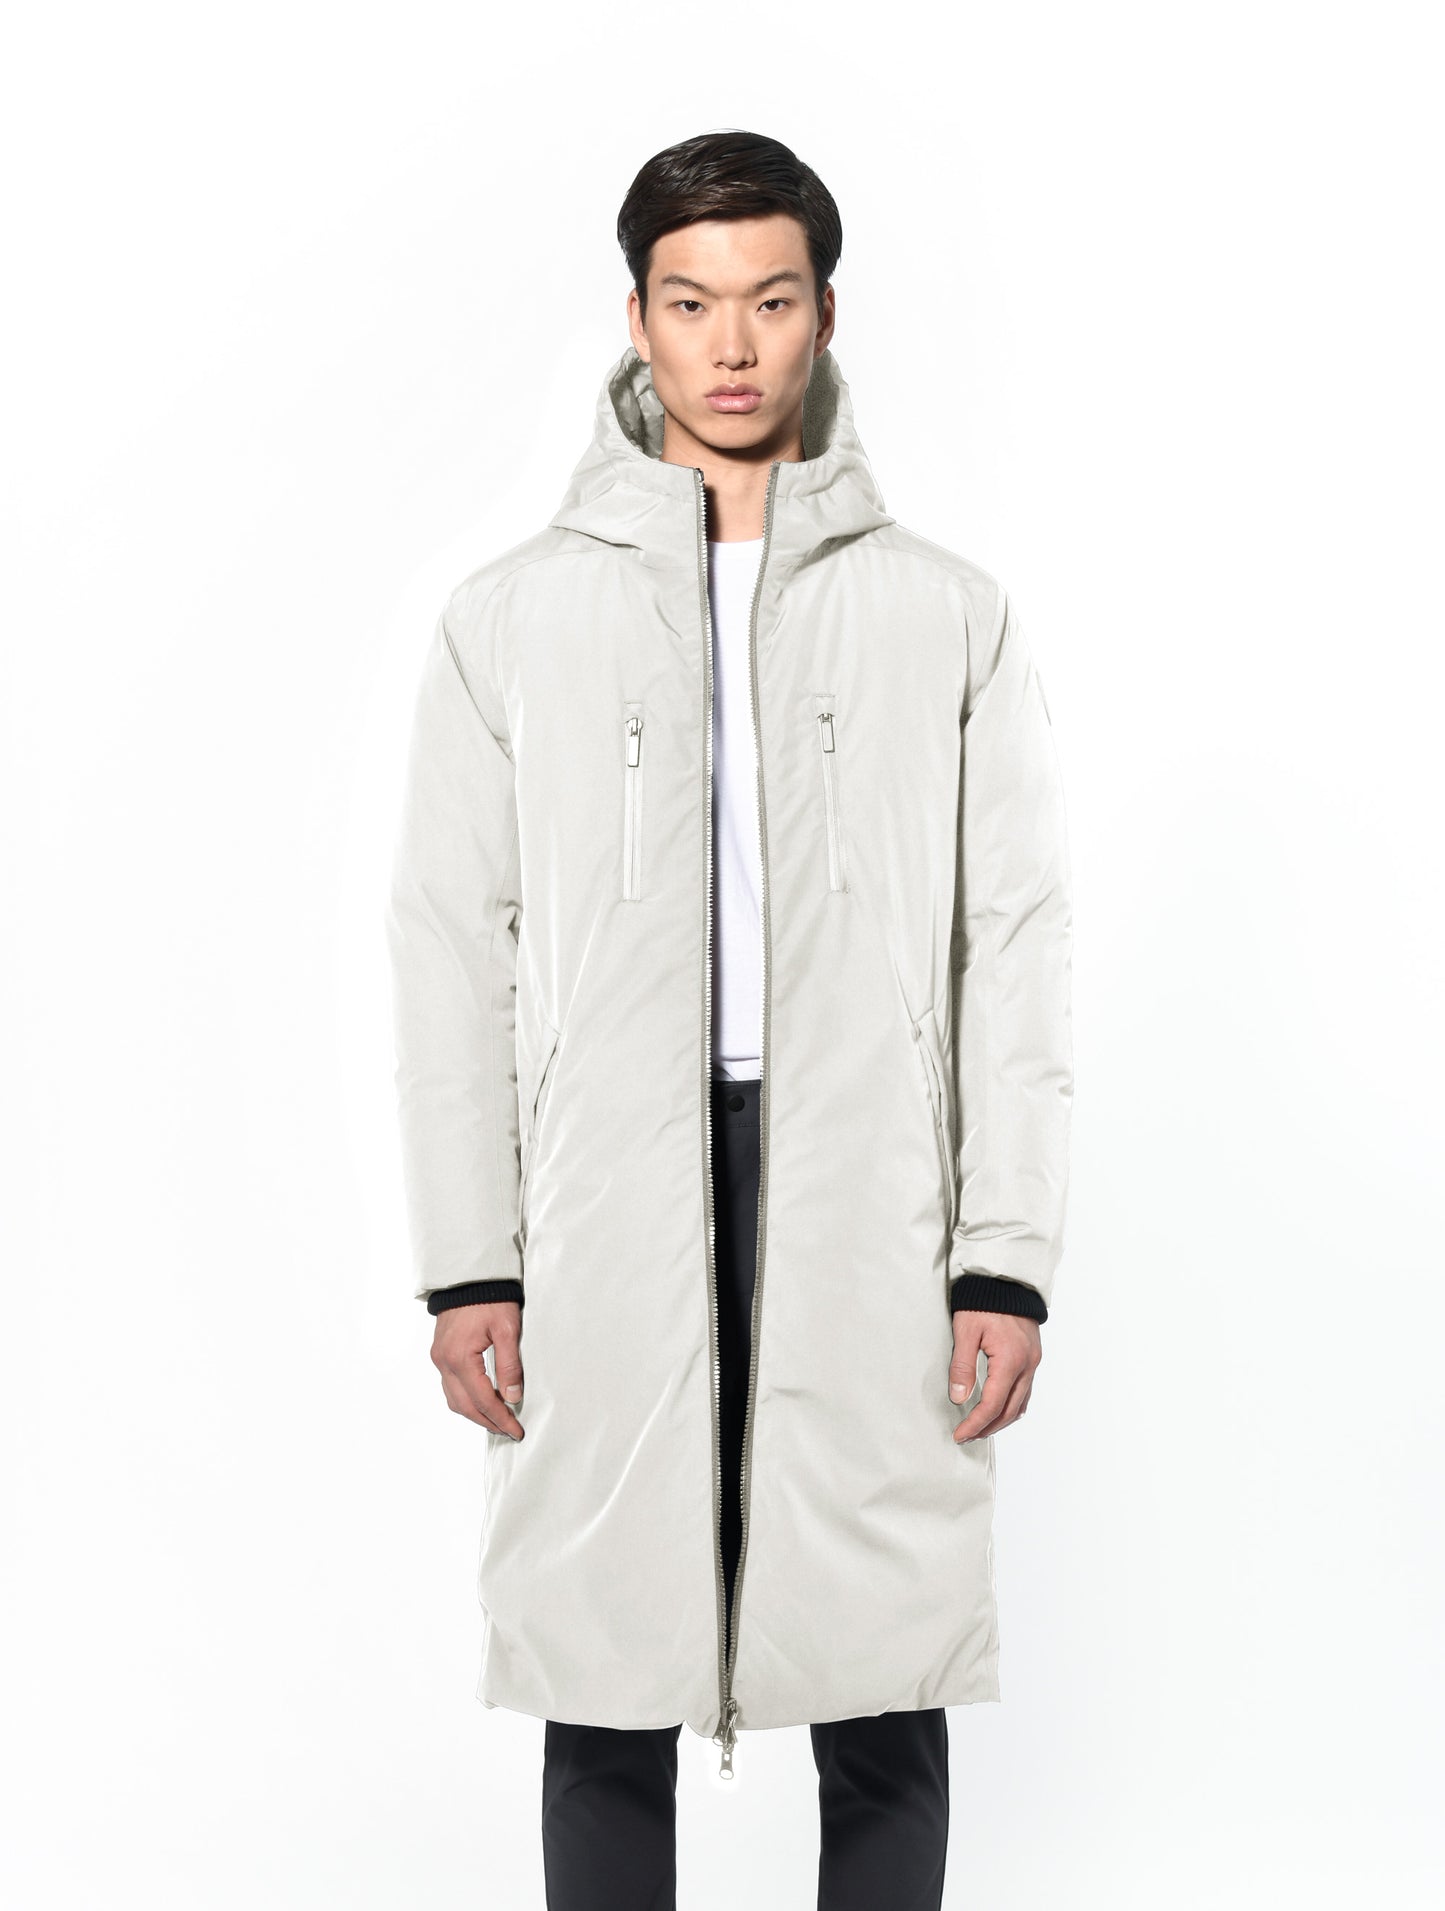 Men's knee length reversible down-filled parka with non-removable hood in Chalk